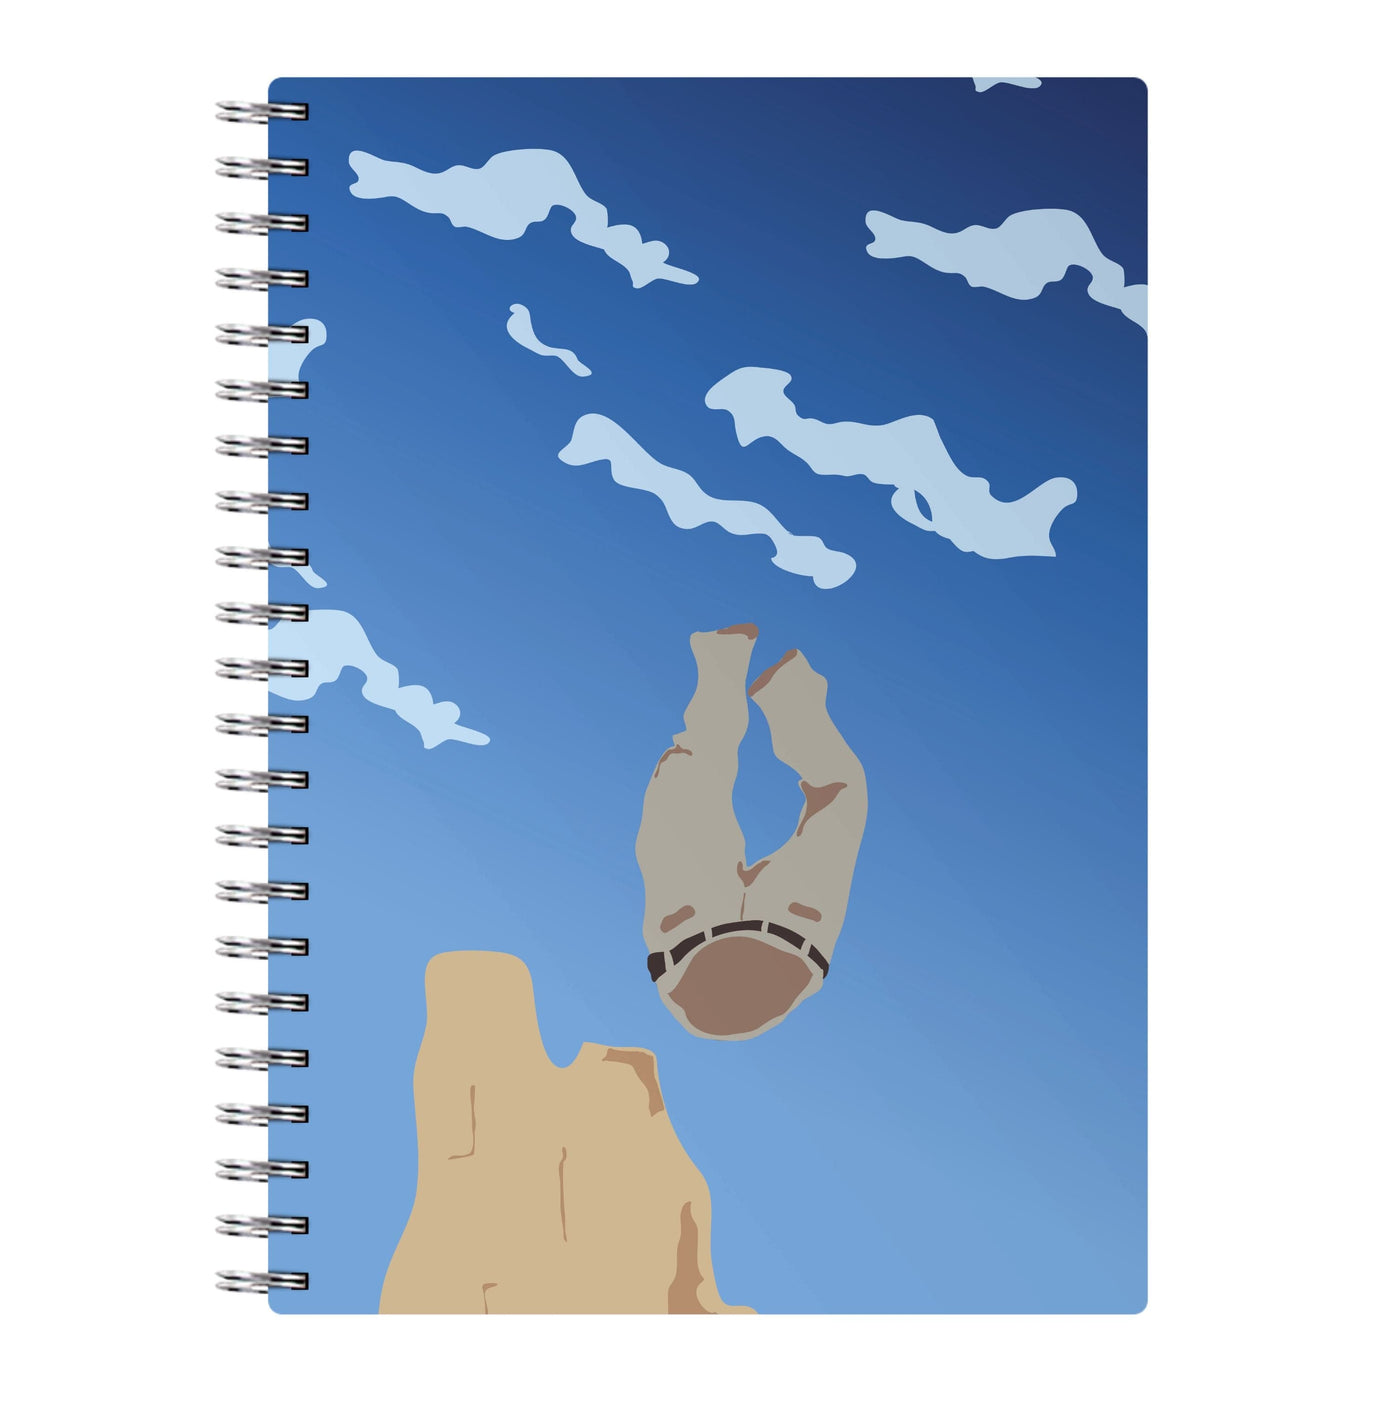 Walter's Trousers - Breaking Bad Notebook